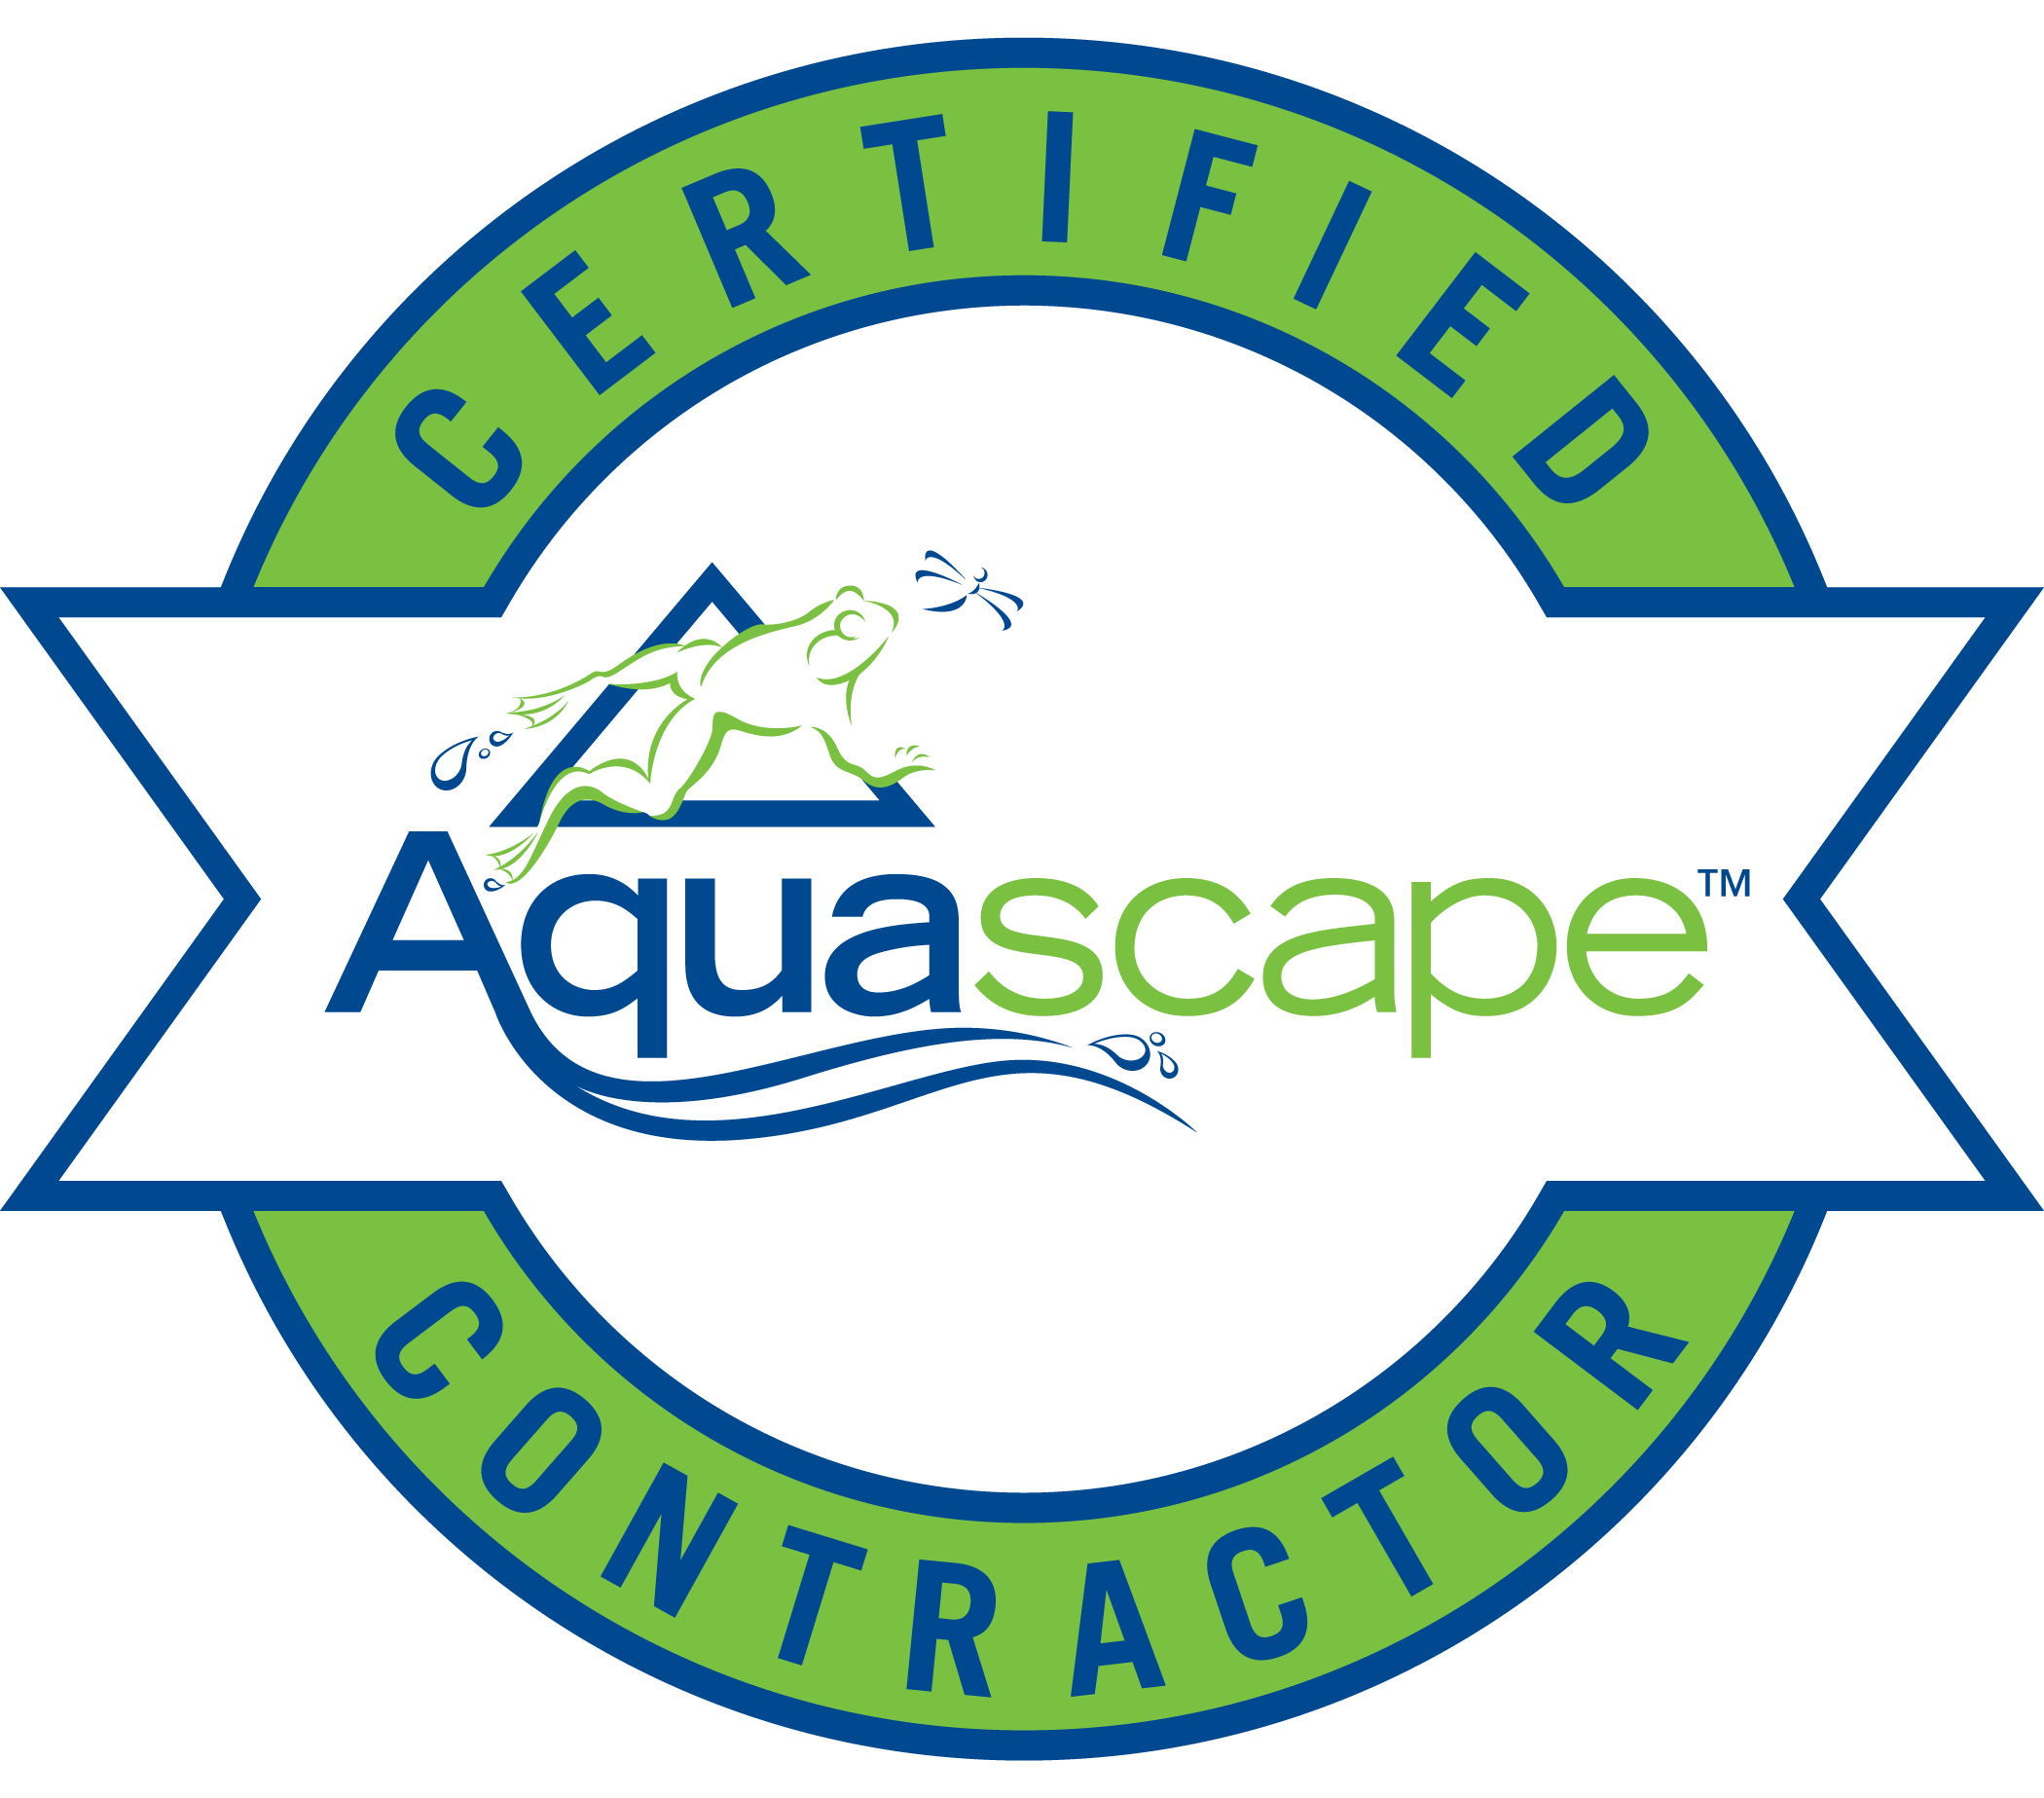 We're An Aquascape Certified Contractor - Certified Aquascape Contractor (2100x1847)